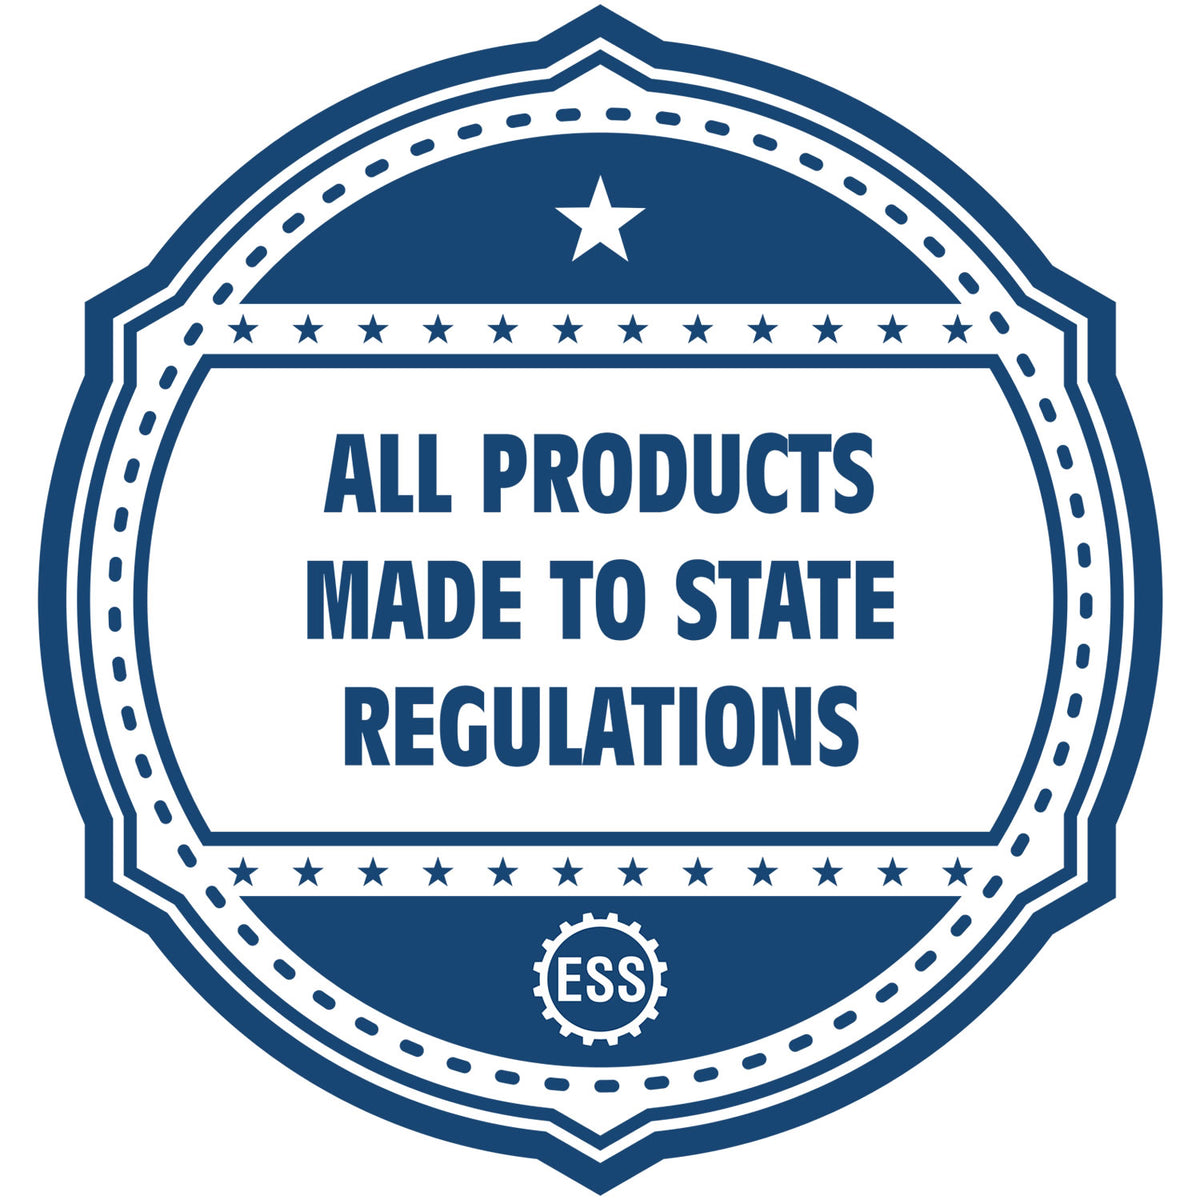 An icon or badge element for the Florida Professional Engineer Seal Stamp showing that this product is made in compliance with state regulations.